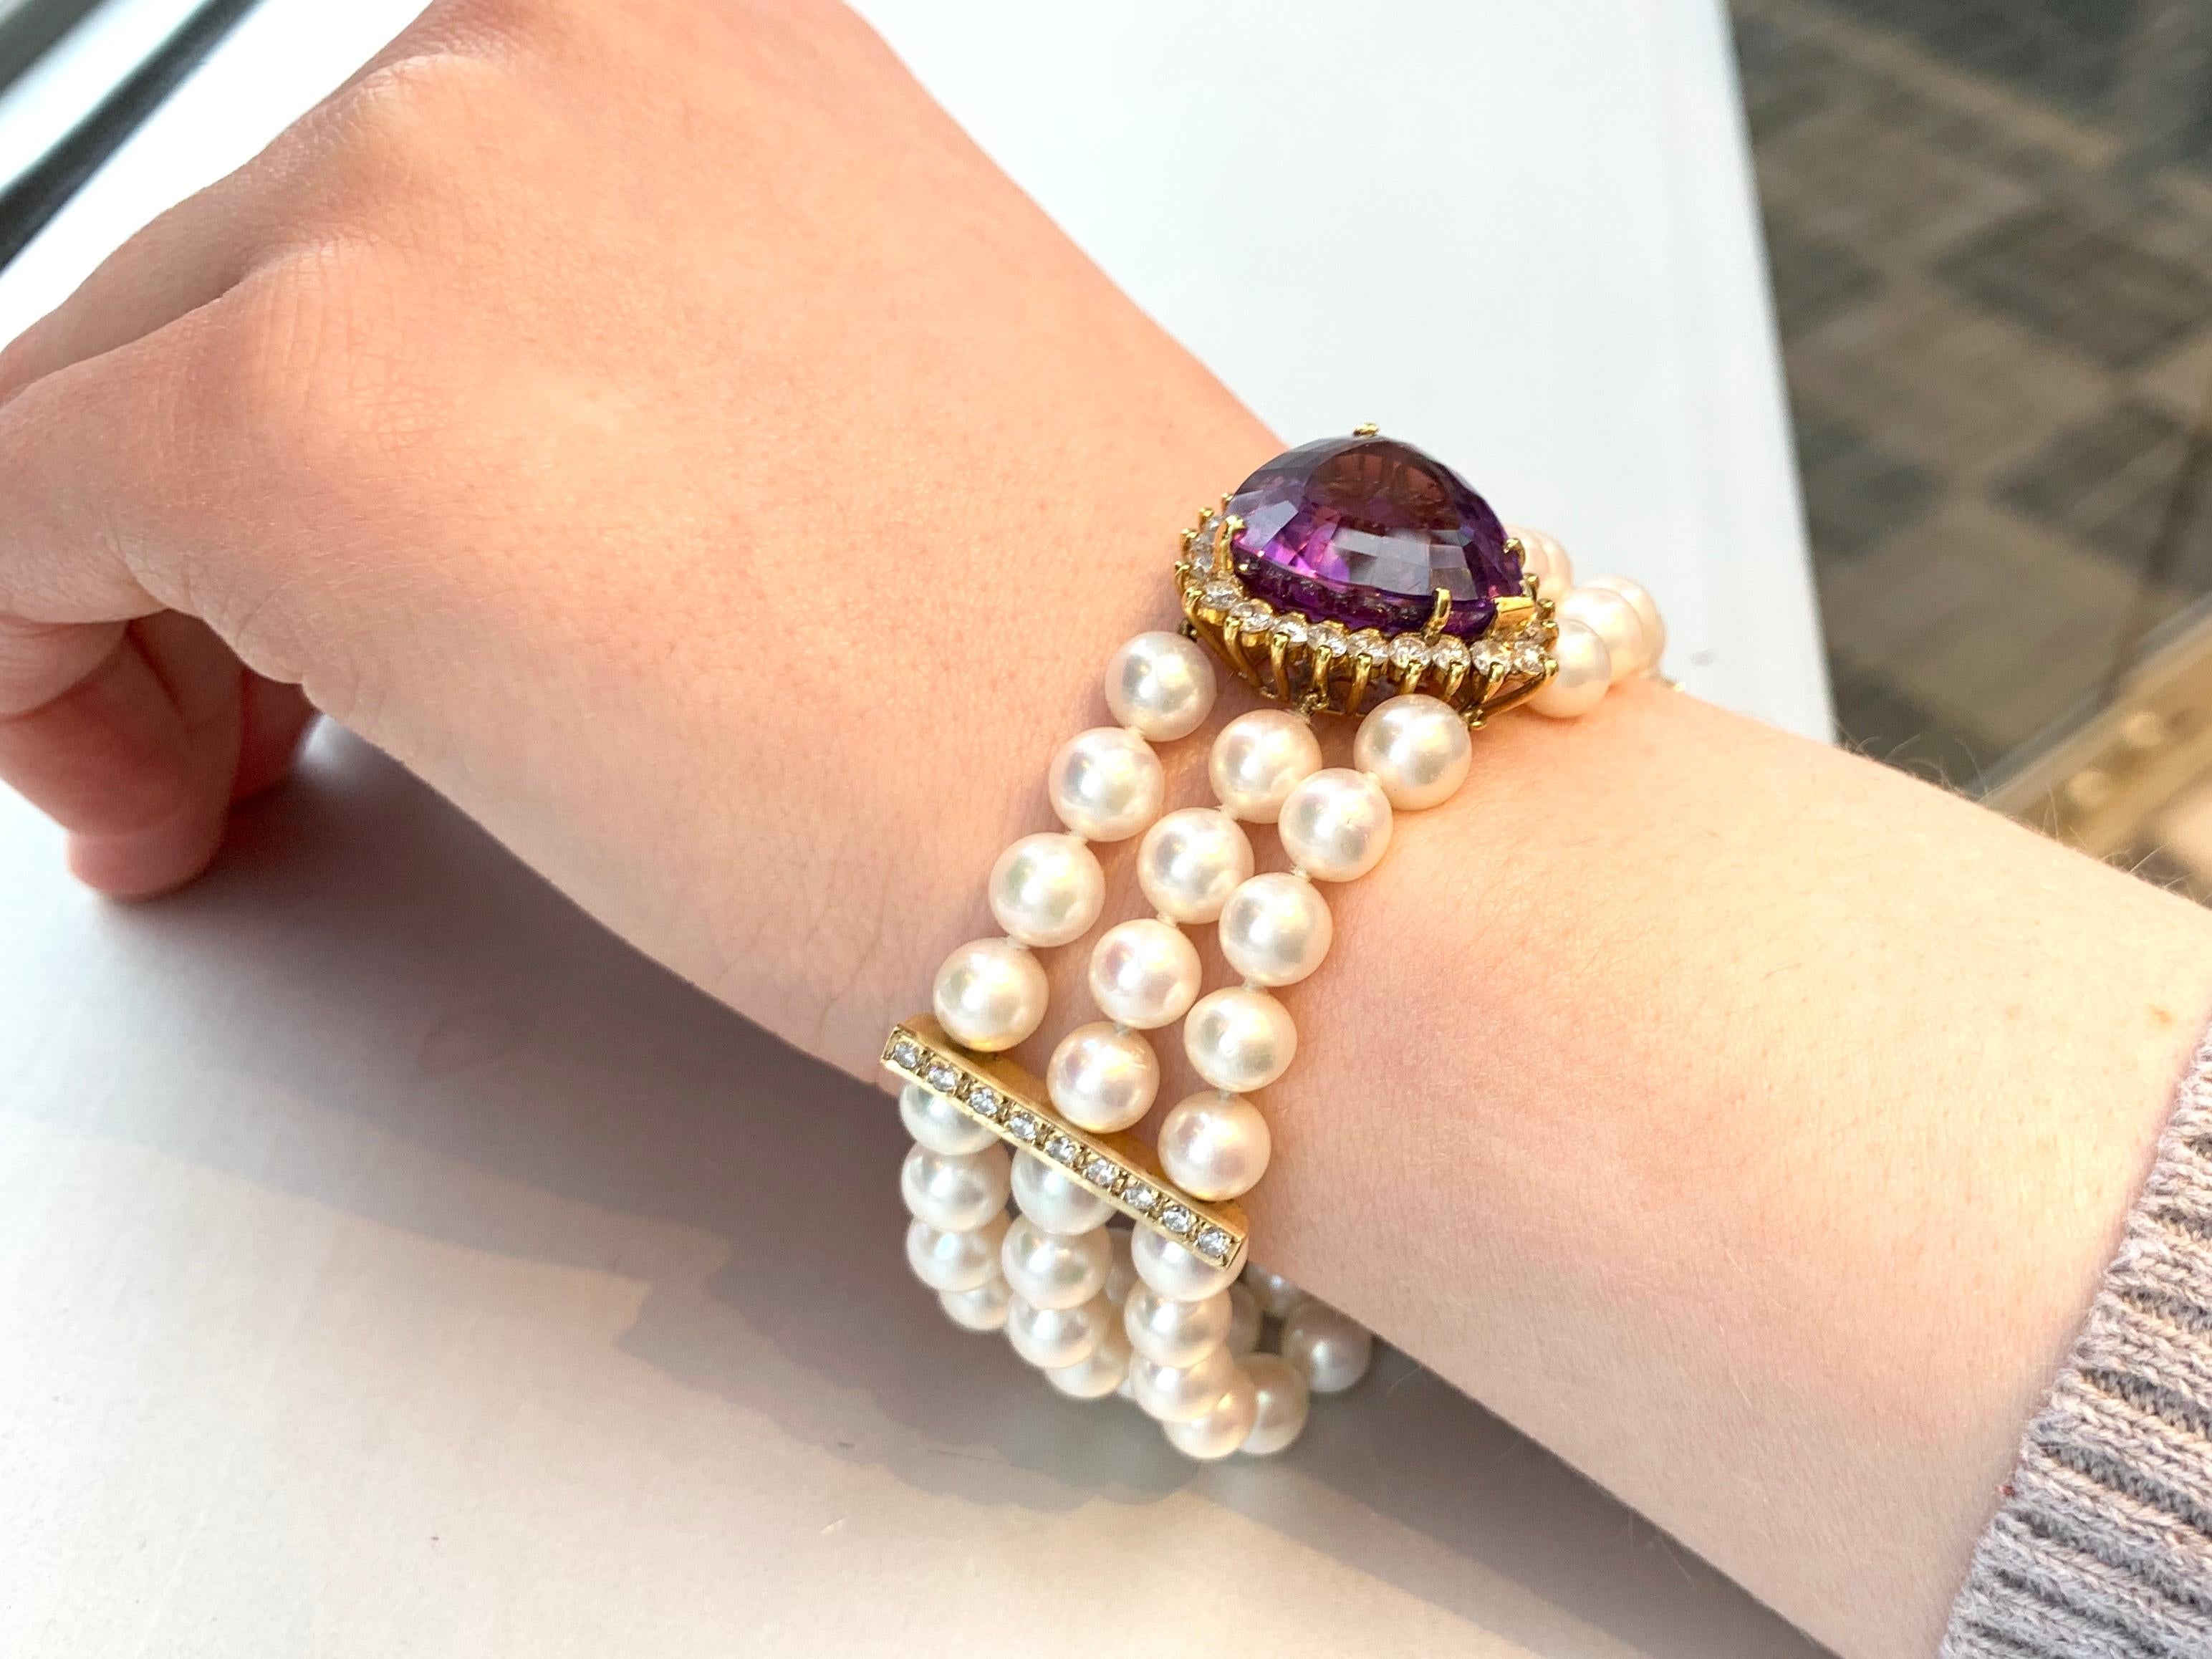 18 Karat Three-Strand Pearl Bracelet with Amethyst and Diamond Center For Sale 5